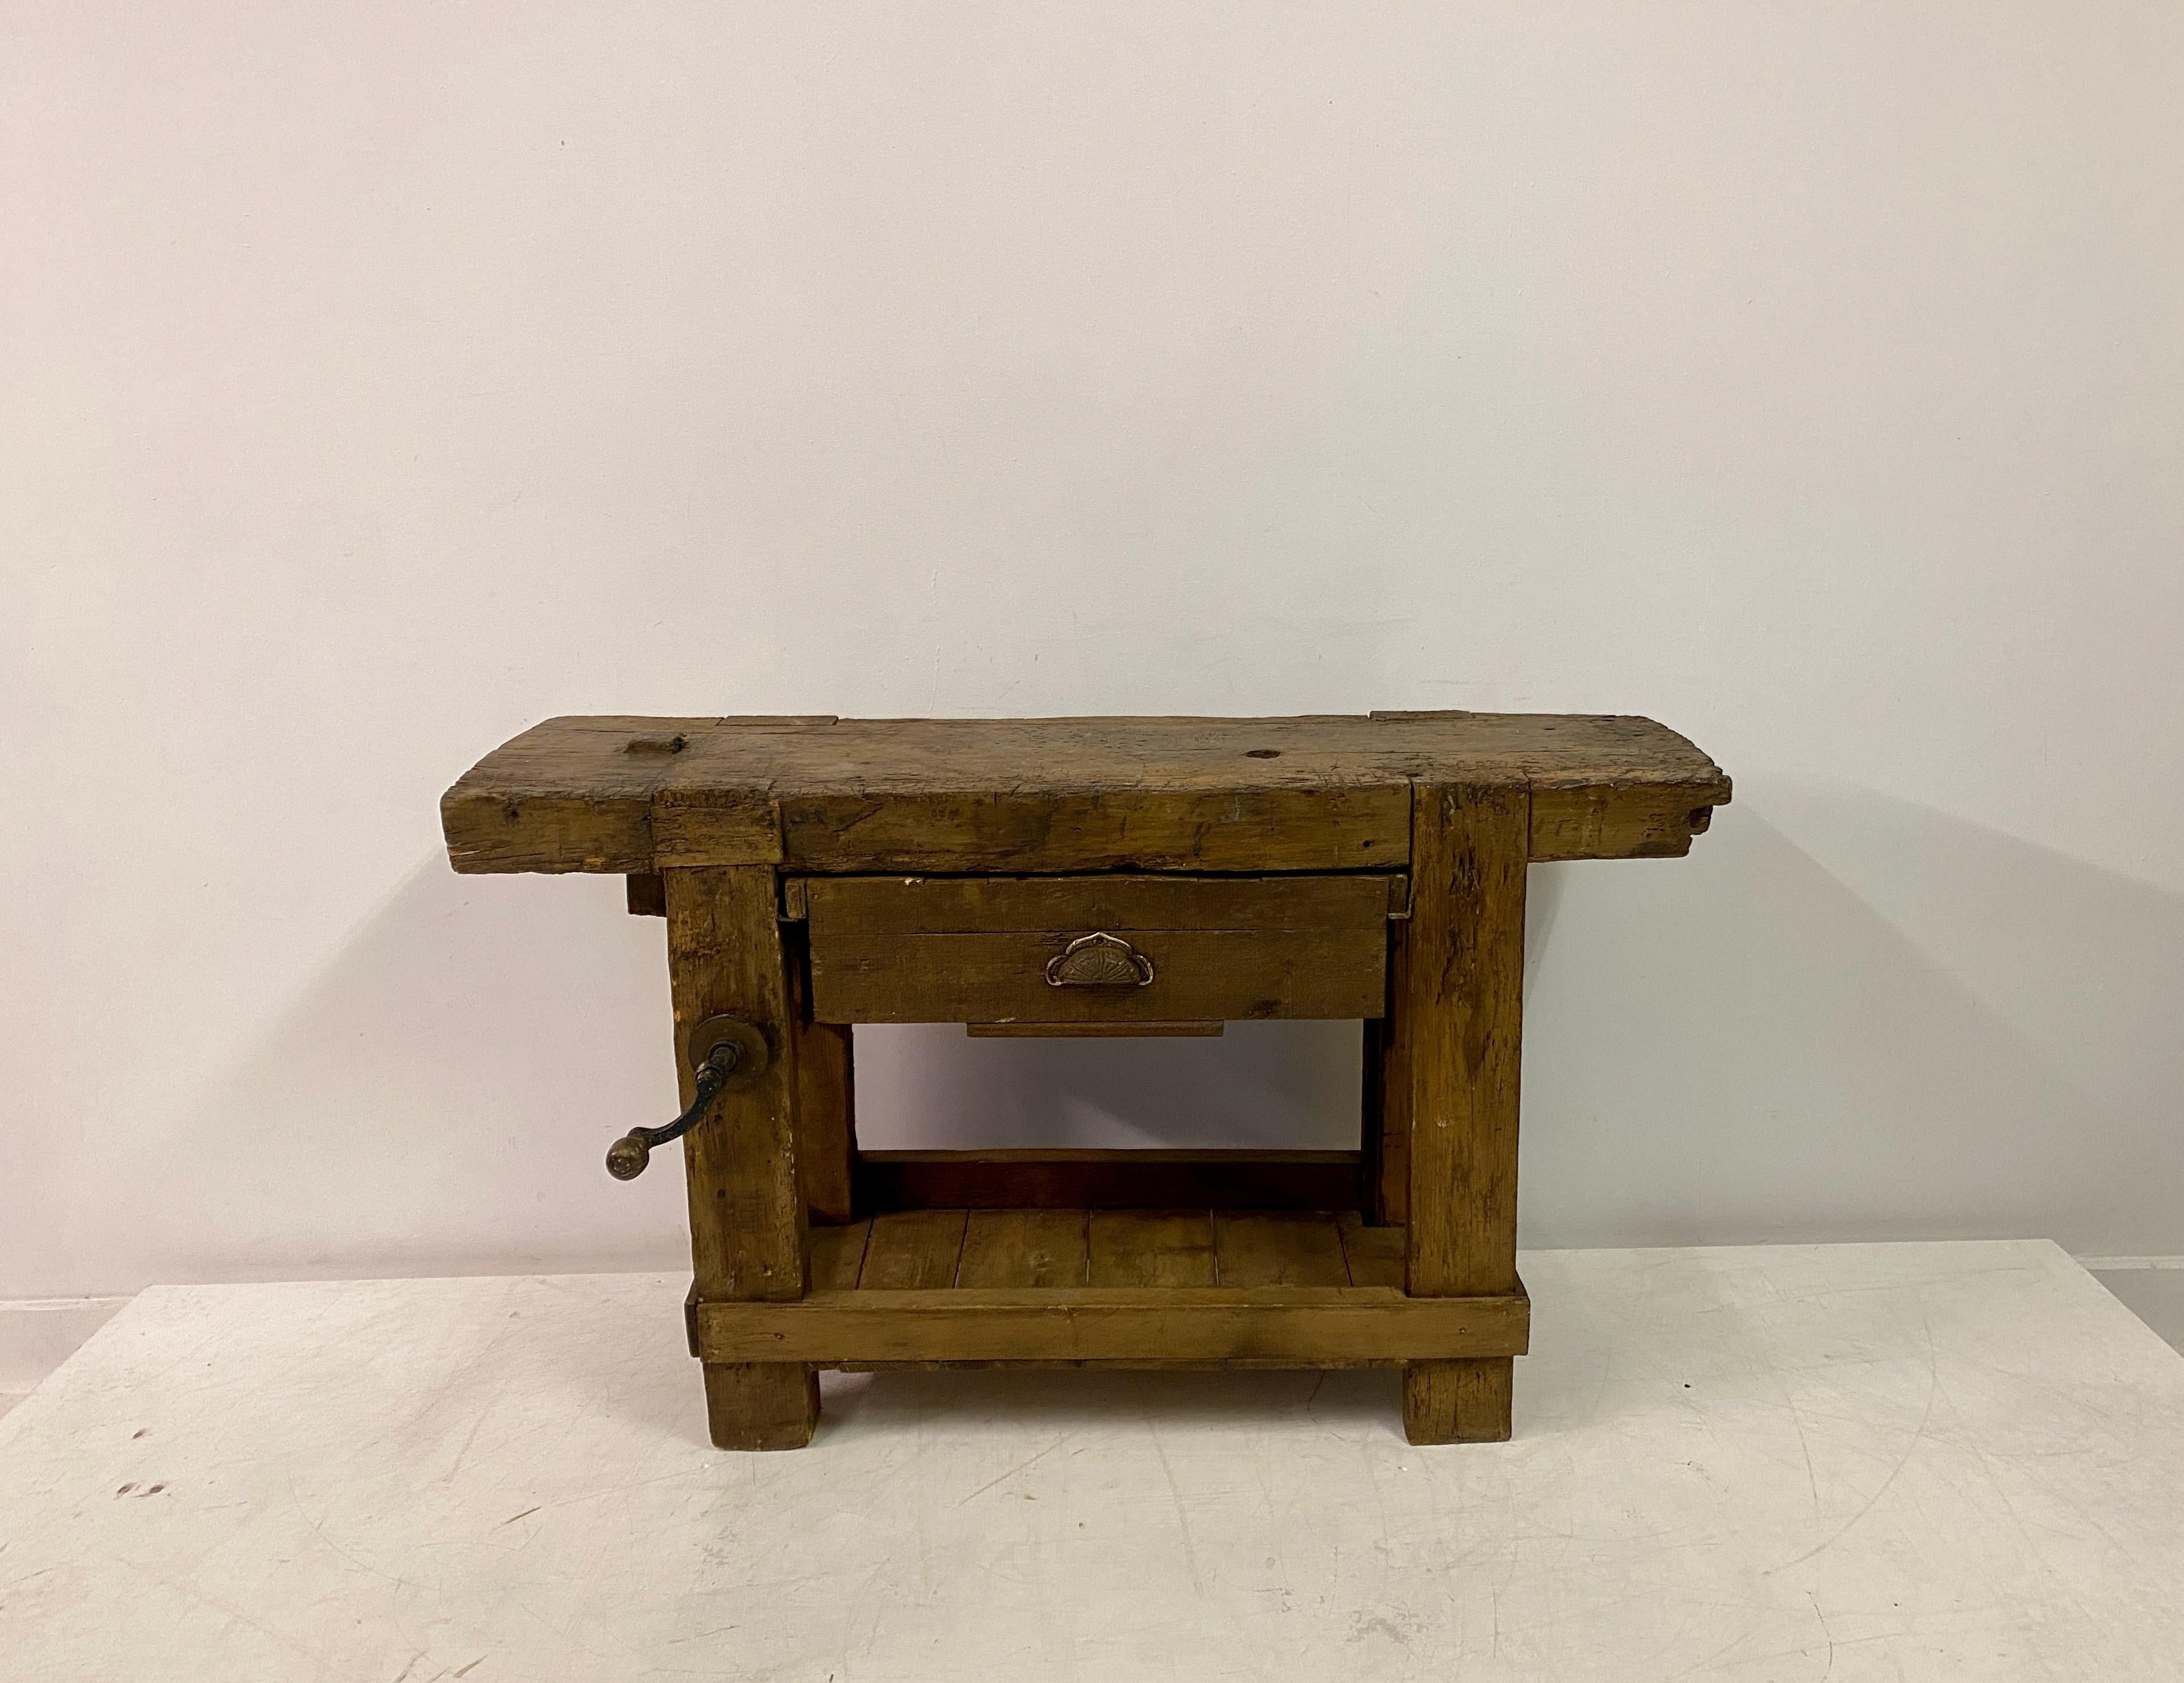 Workbench

Rustic original condition

Drawer

French 19th Century/Early 20th